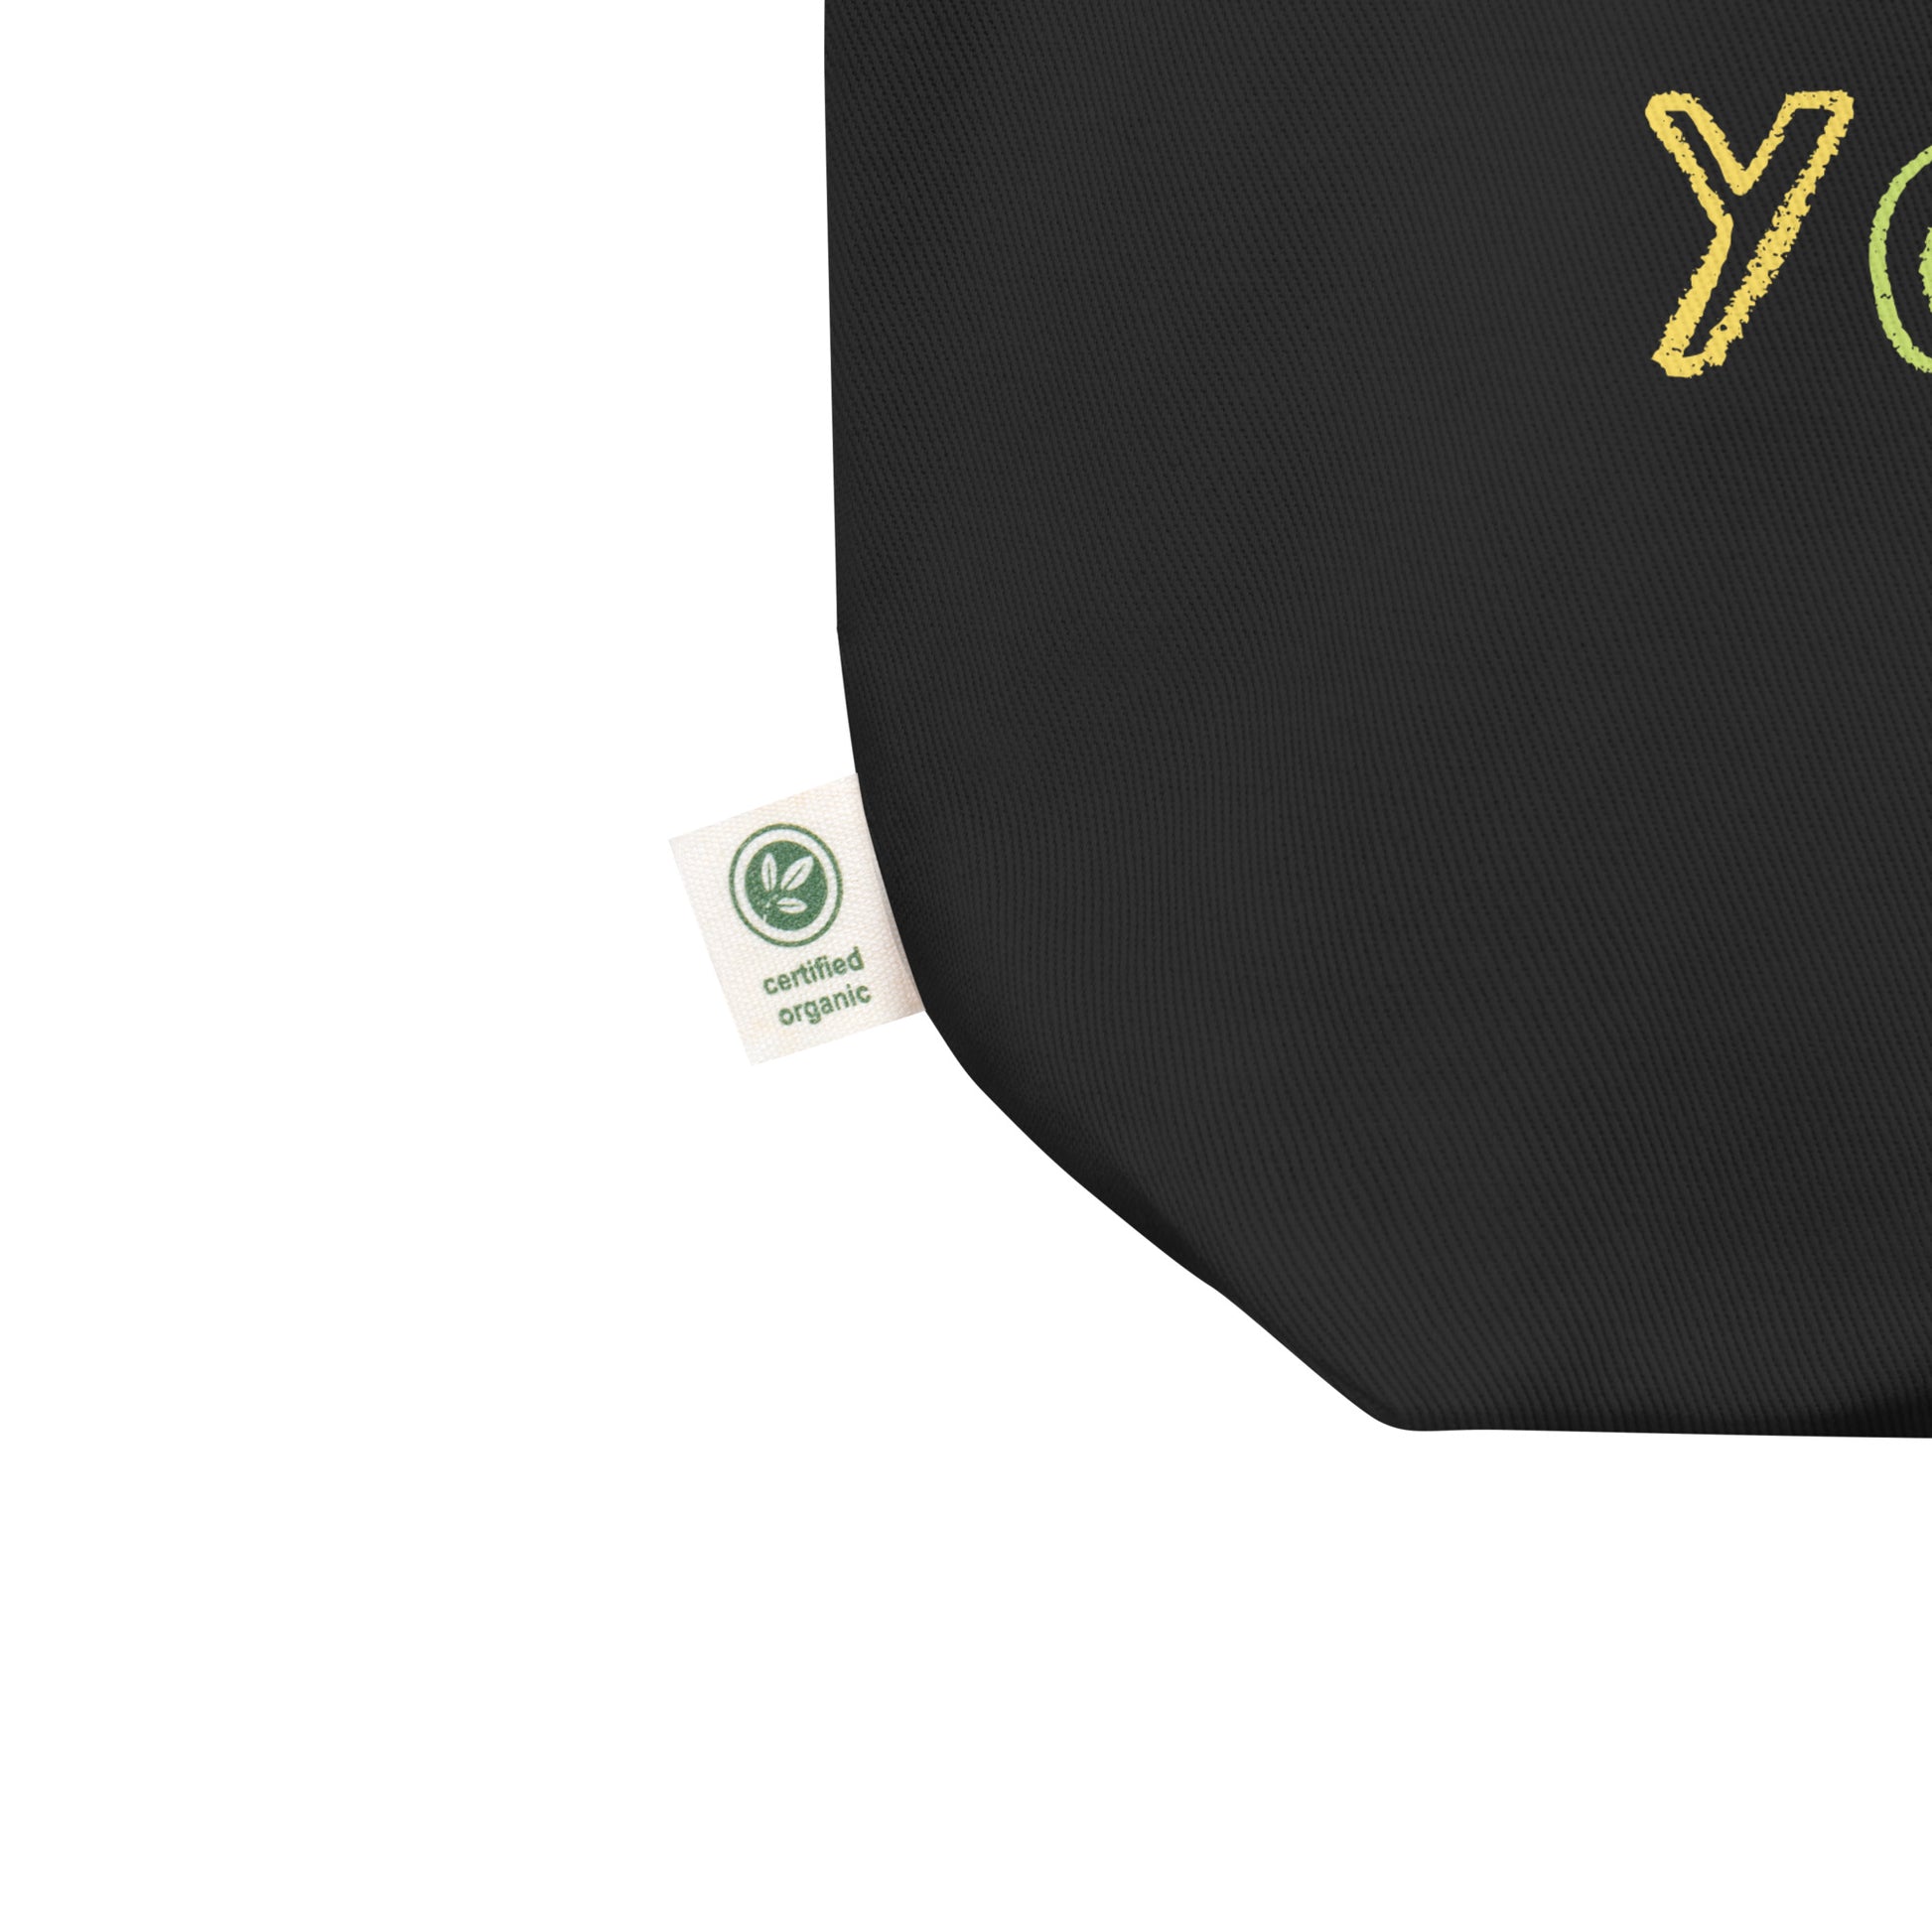 Express Yourself Tote Bag